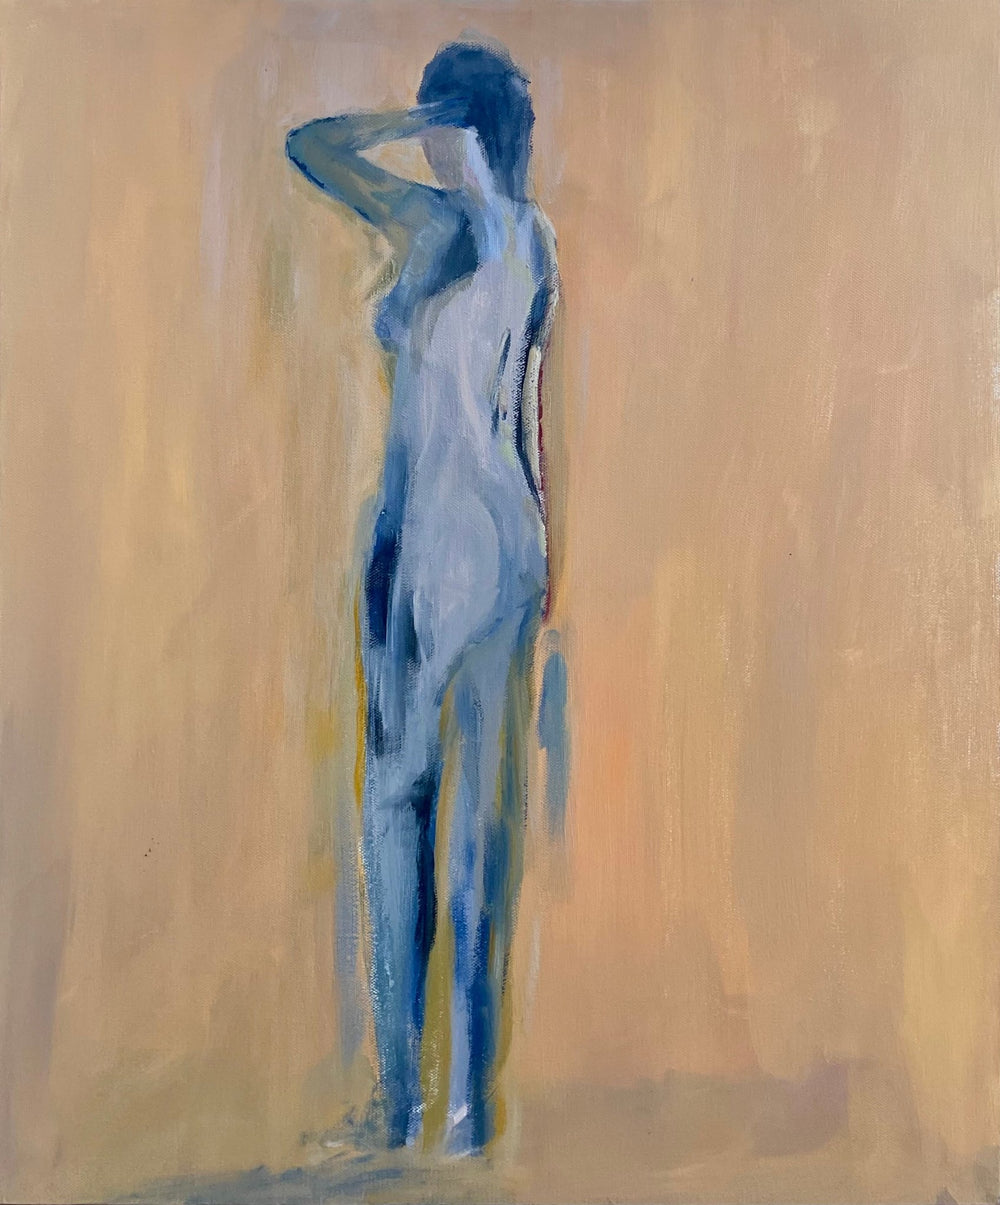 Acrylic painting on canvas of standing female figure with hand on head. Female is blue against a warm backgound. Languid - Artly International